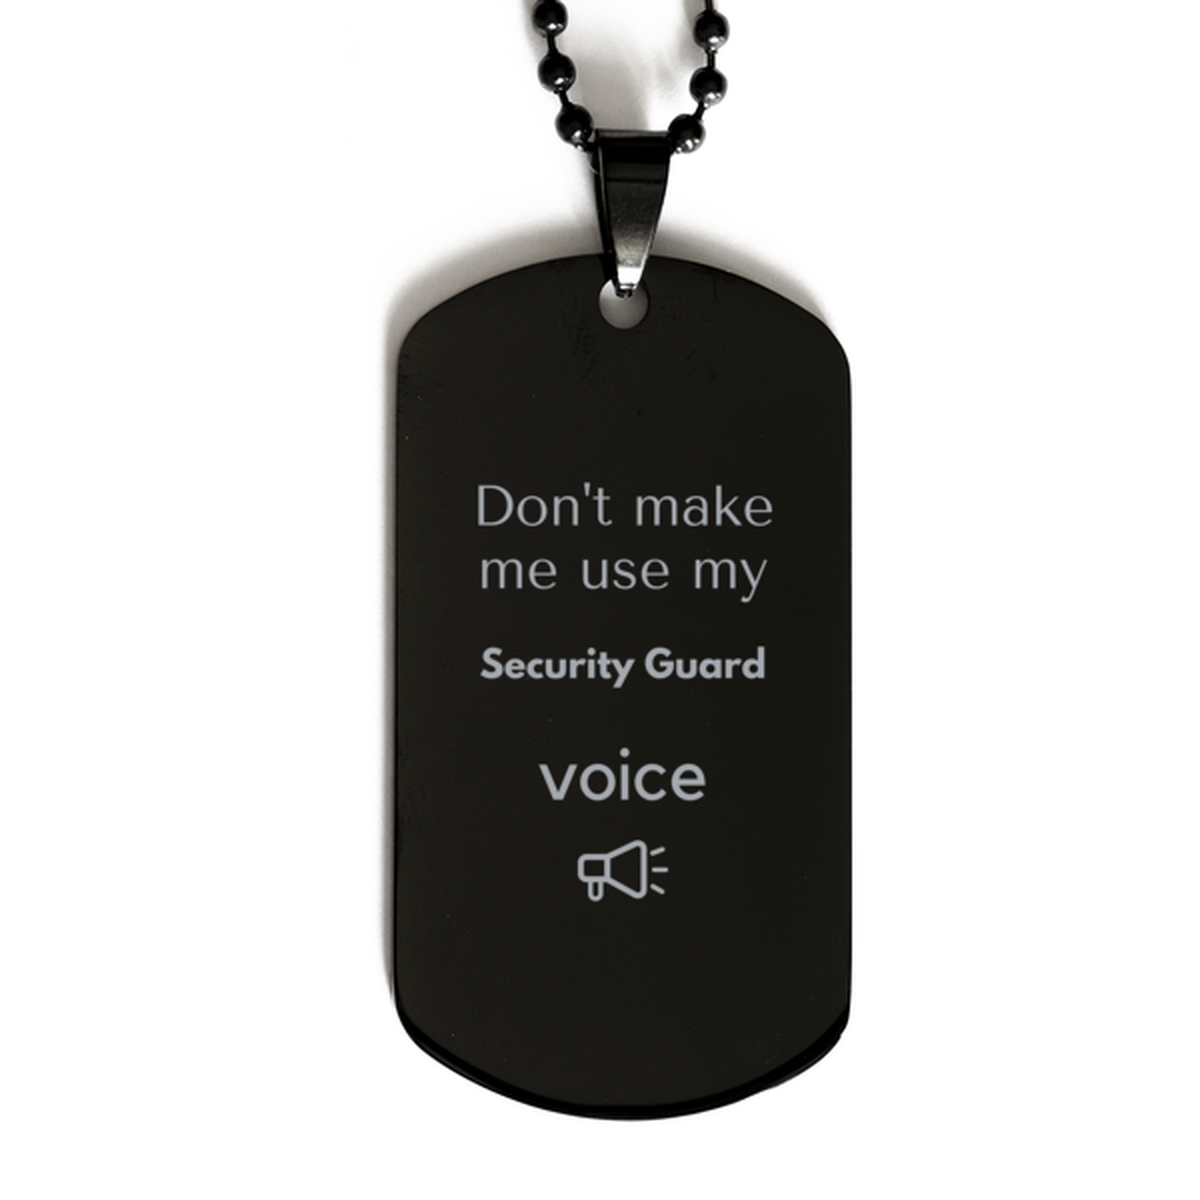 Don't make me use my Security Guard voice, Sarcasm Security Guard Gifts, Christmas Security Guard Black Dog Tag Birthday Unique Gifts For Security Guard Coworkers, Men, Women, Colleague, Friends